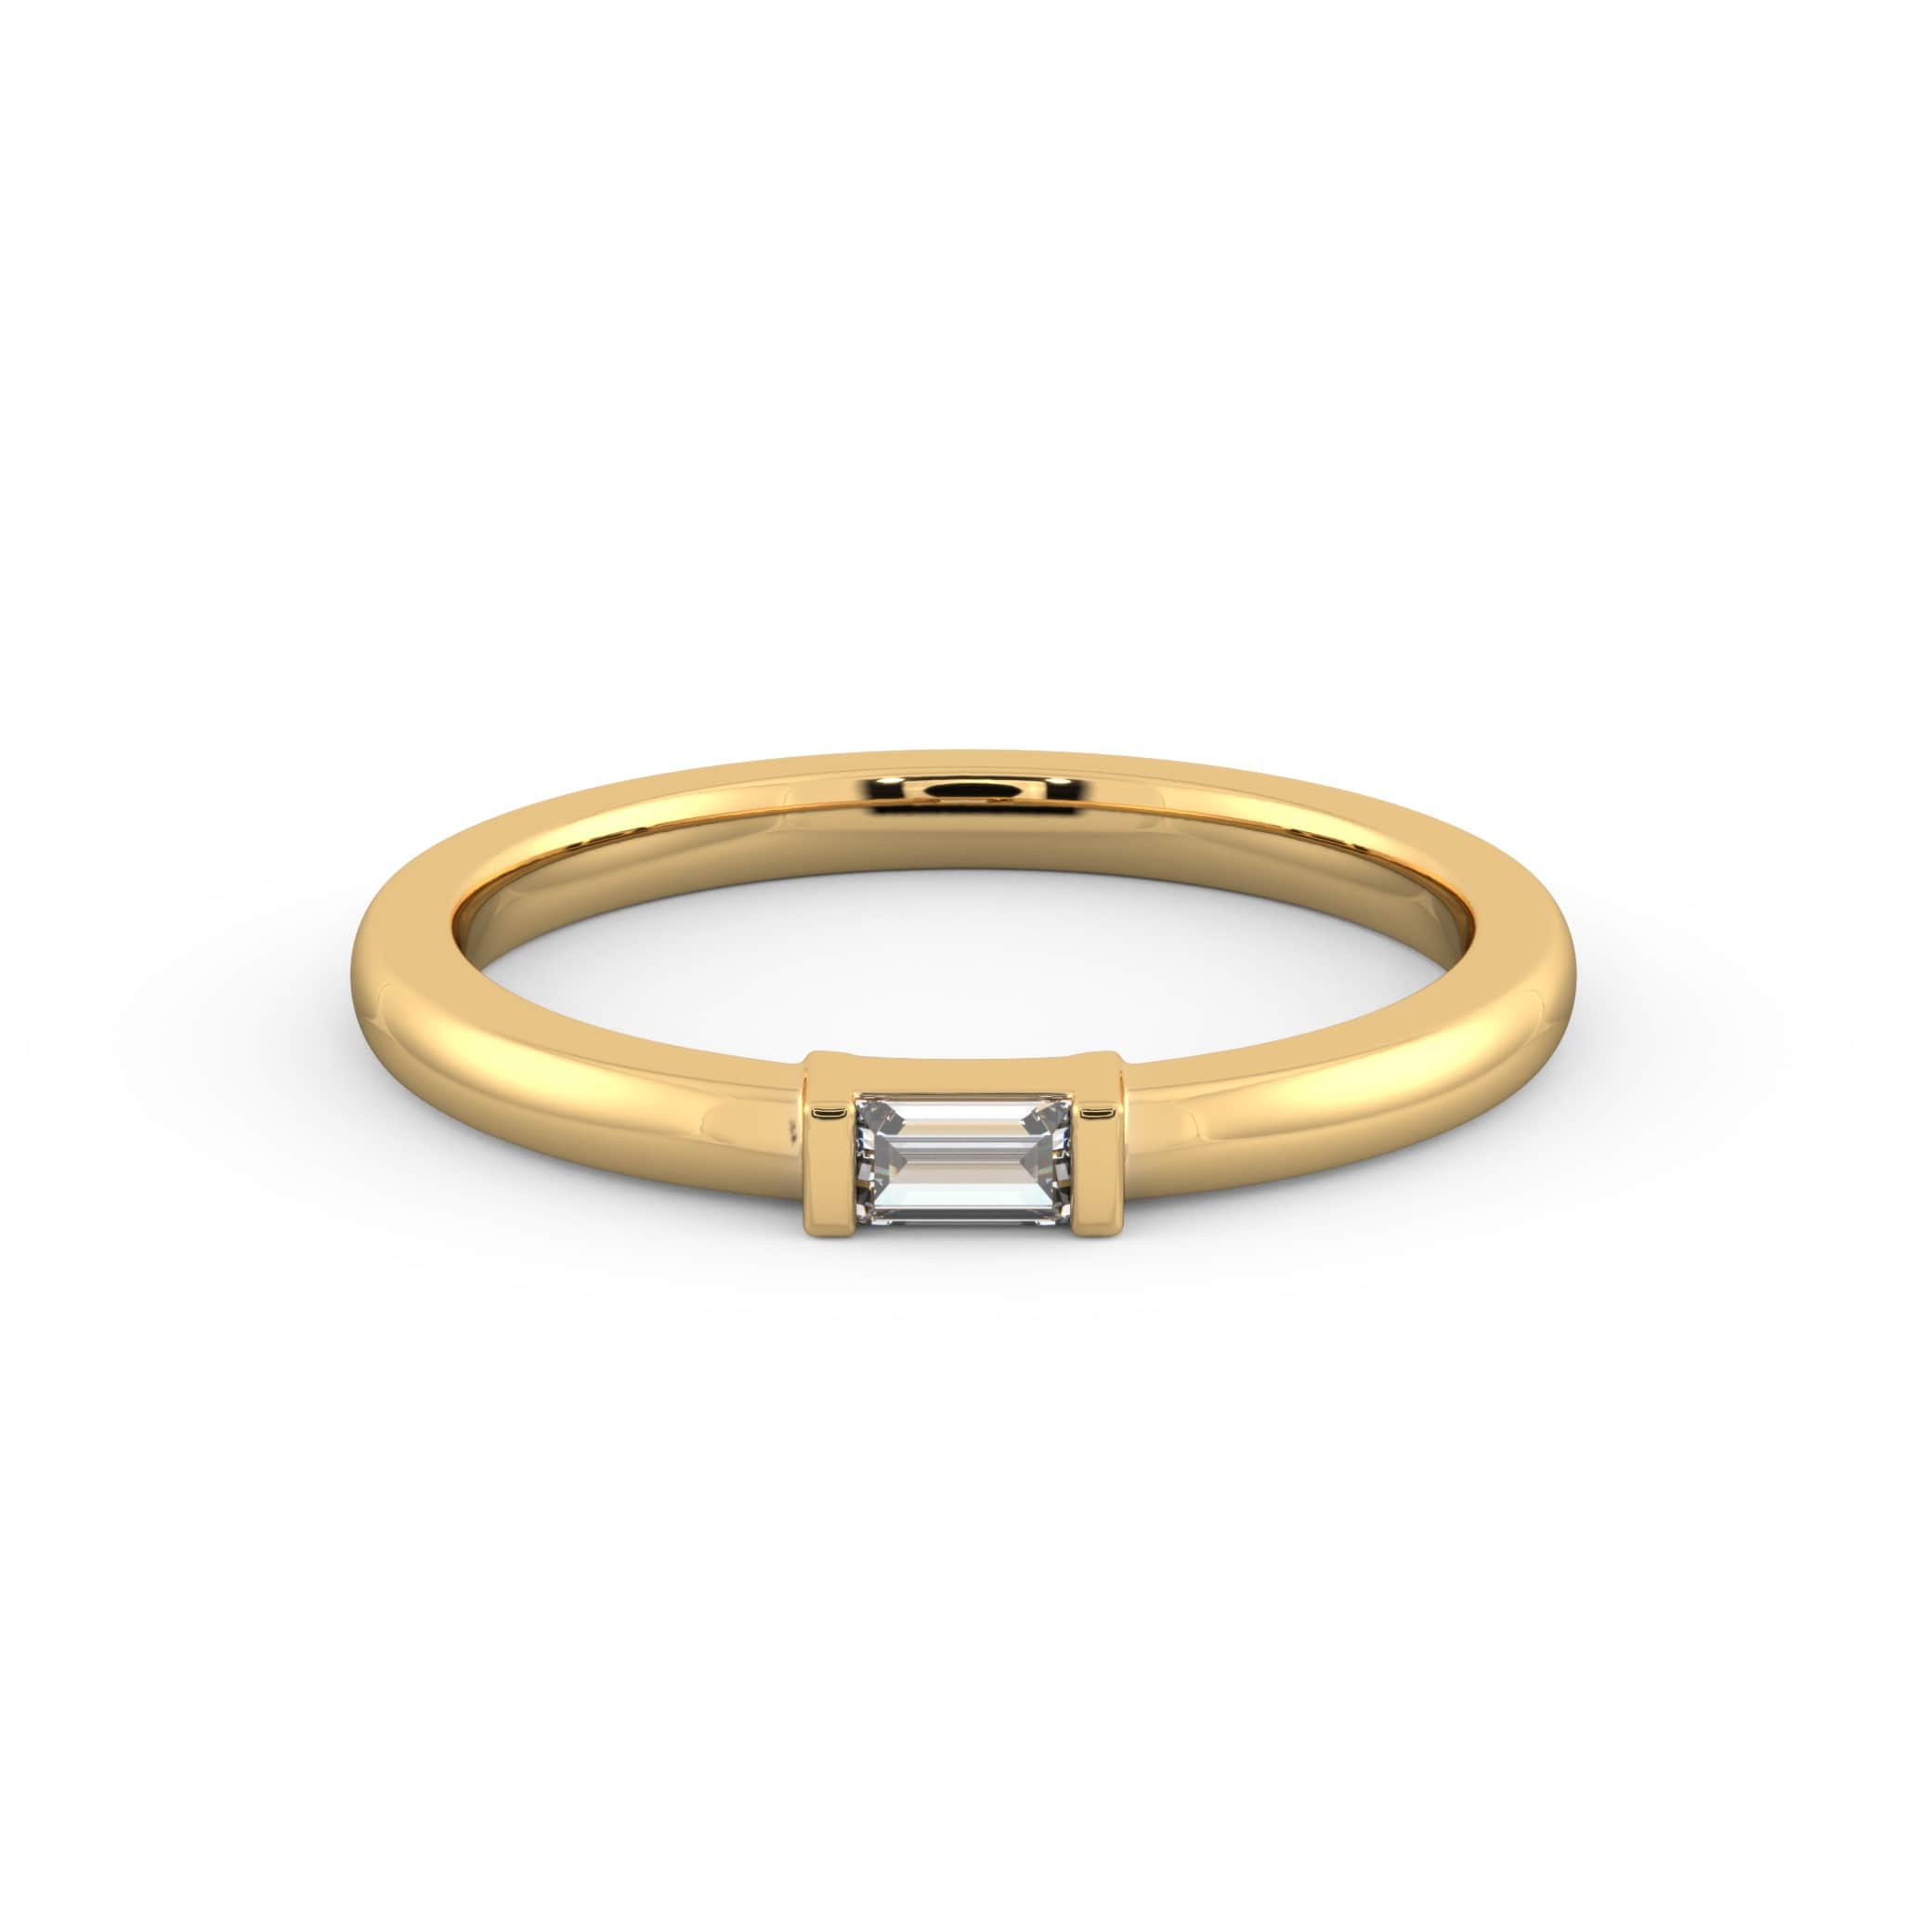 Single Baguette Diamond Ring in Yellow Gold